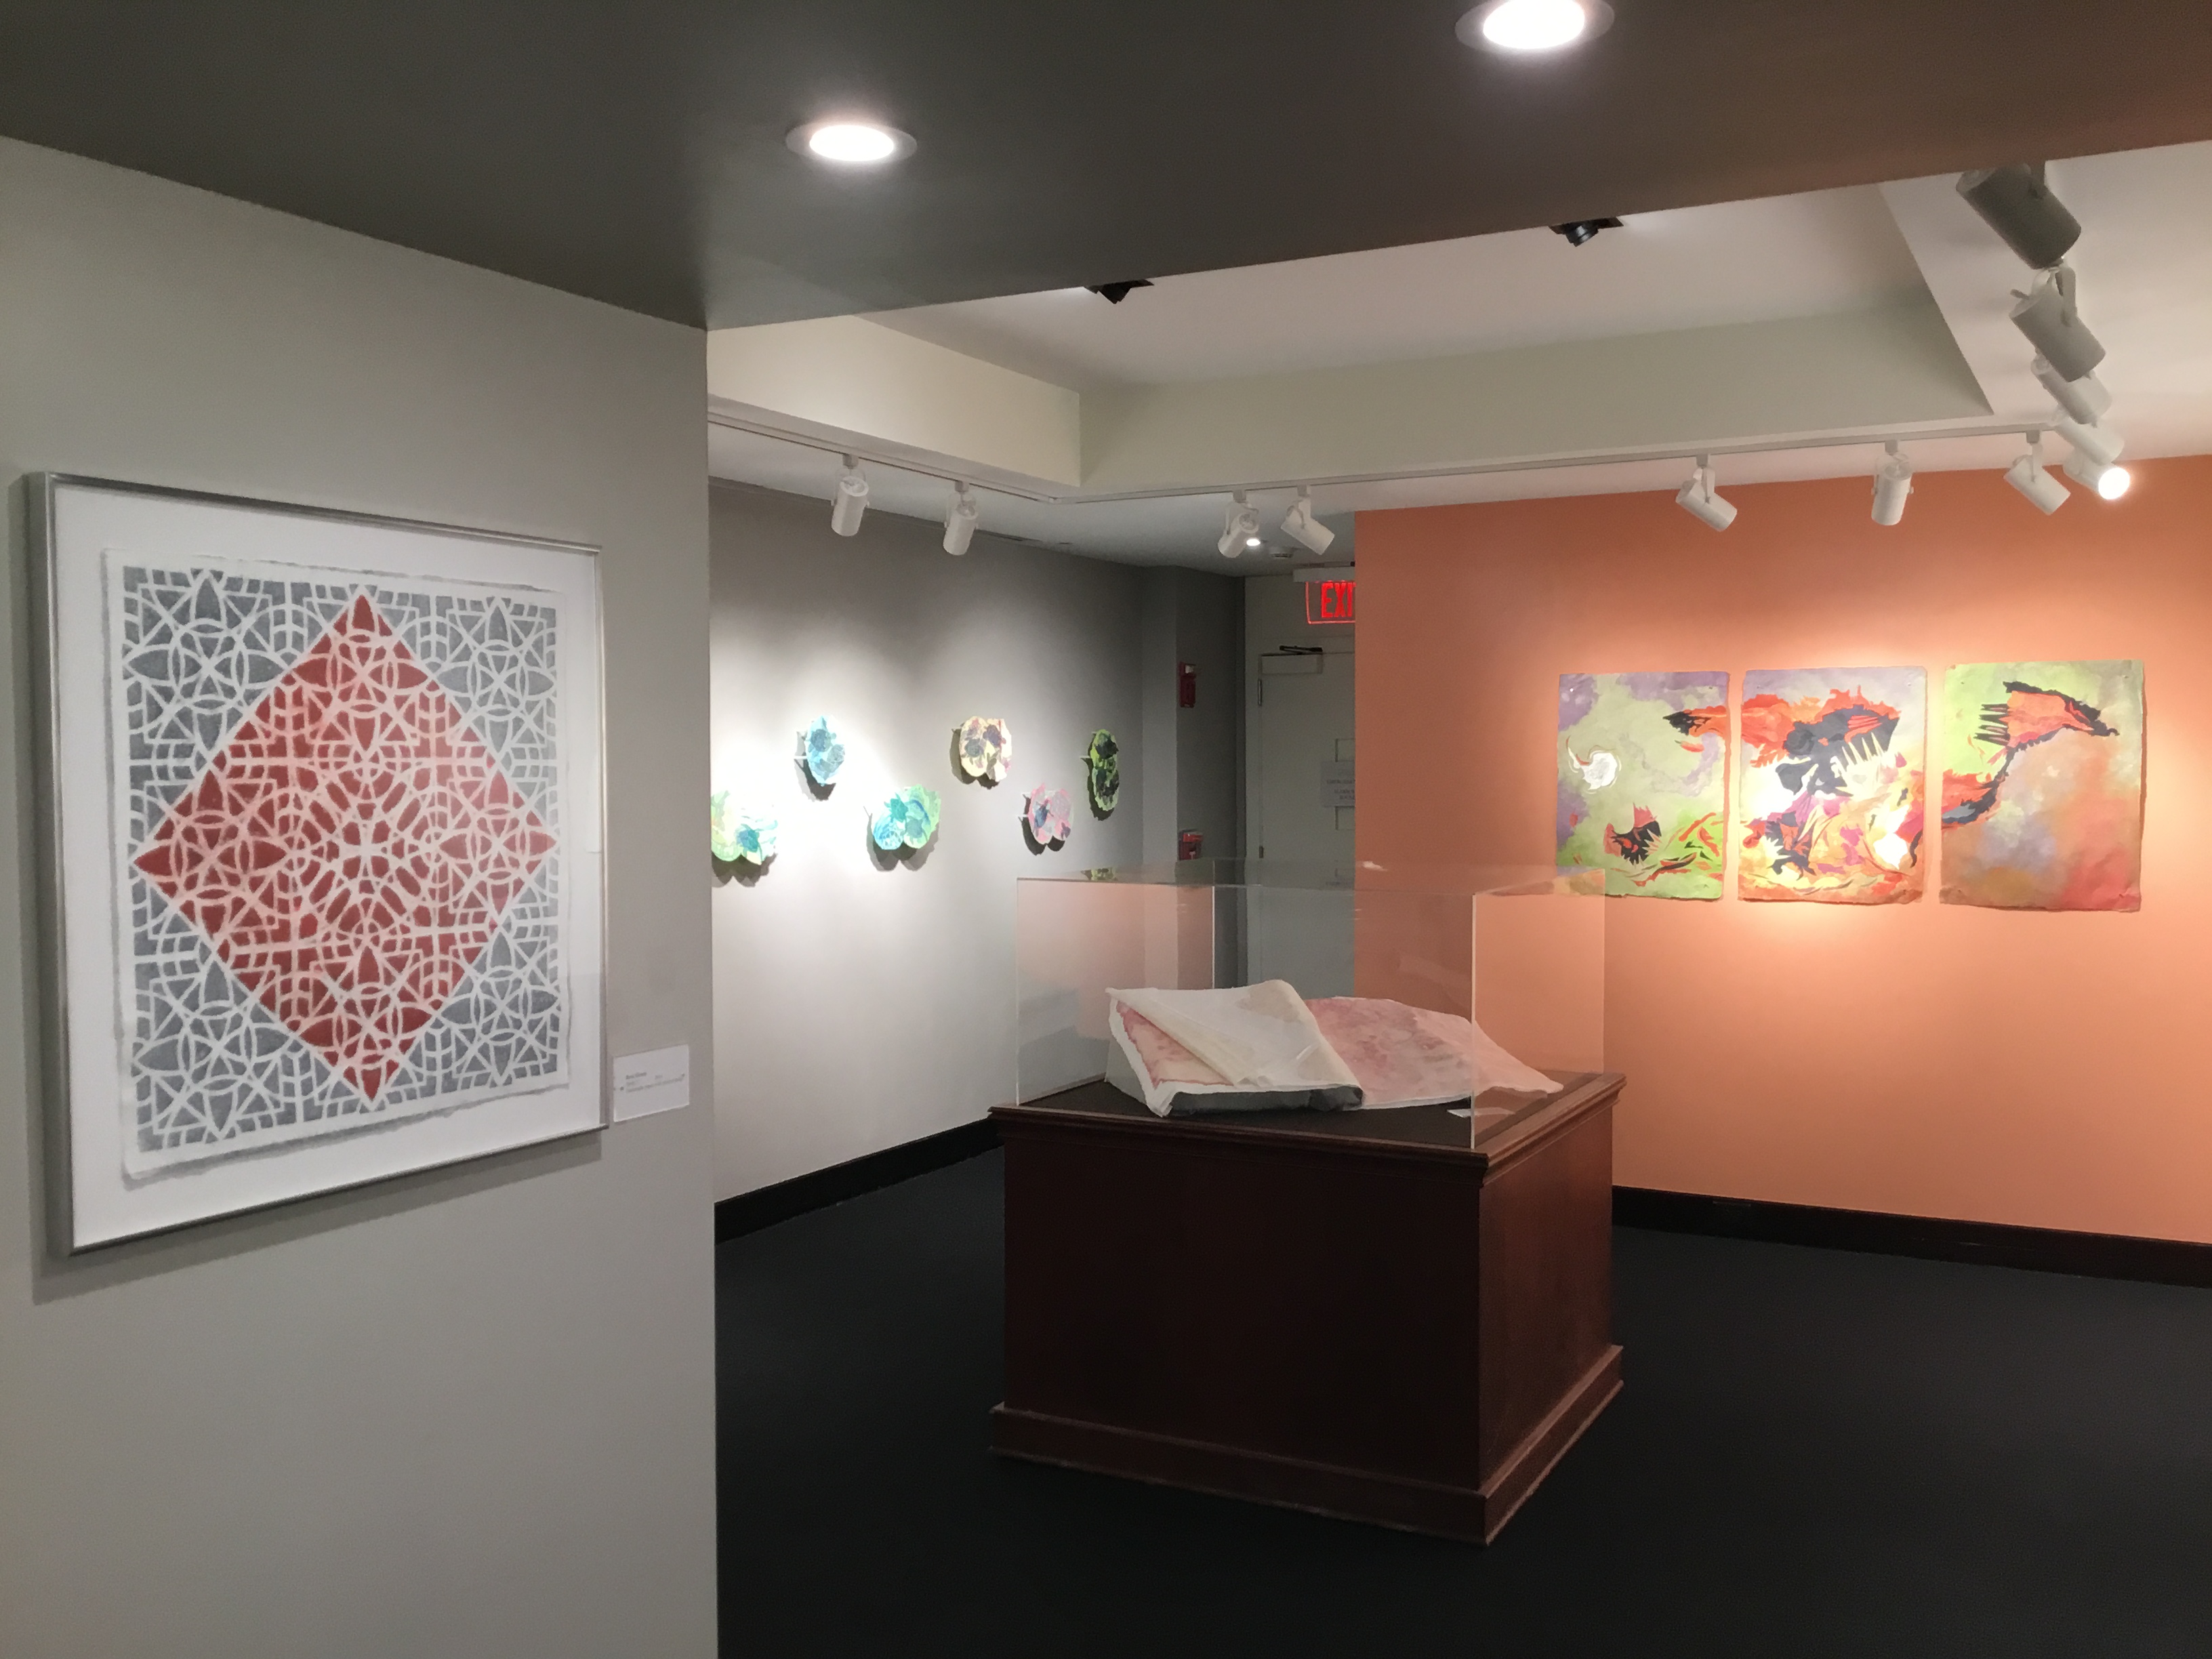 The front and left sides of the back room. On the far left is a piece of paper with a patterned design, colored grey on the outside and a red diamond shape on the inside. Behind this pieces are three-dimensional, multi-color pieces of paper, One the back wall are three marbled pieces of paper.